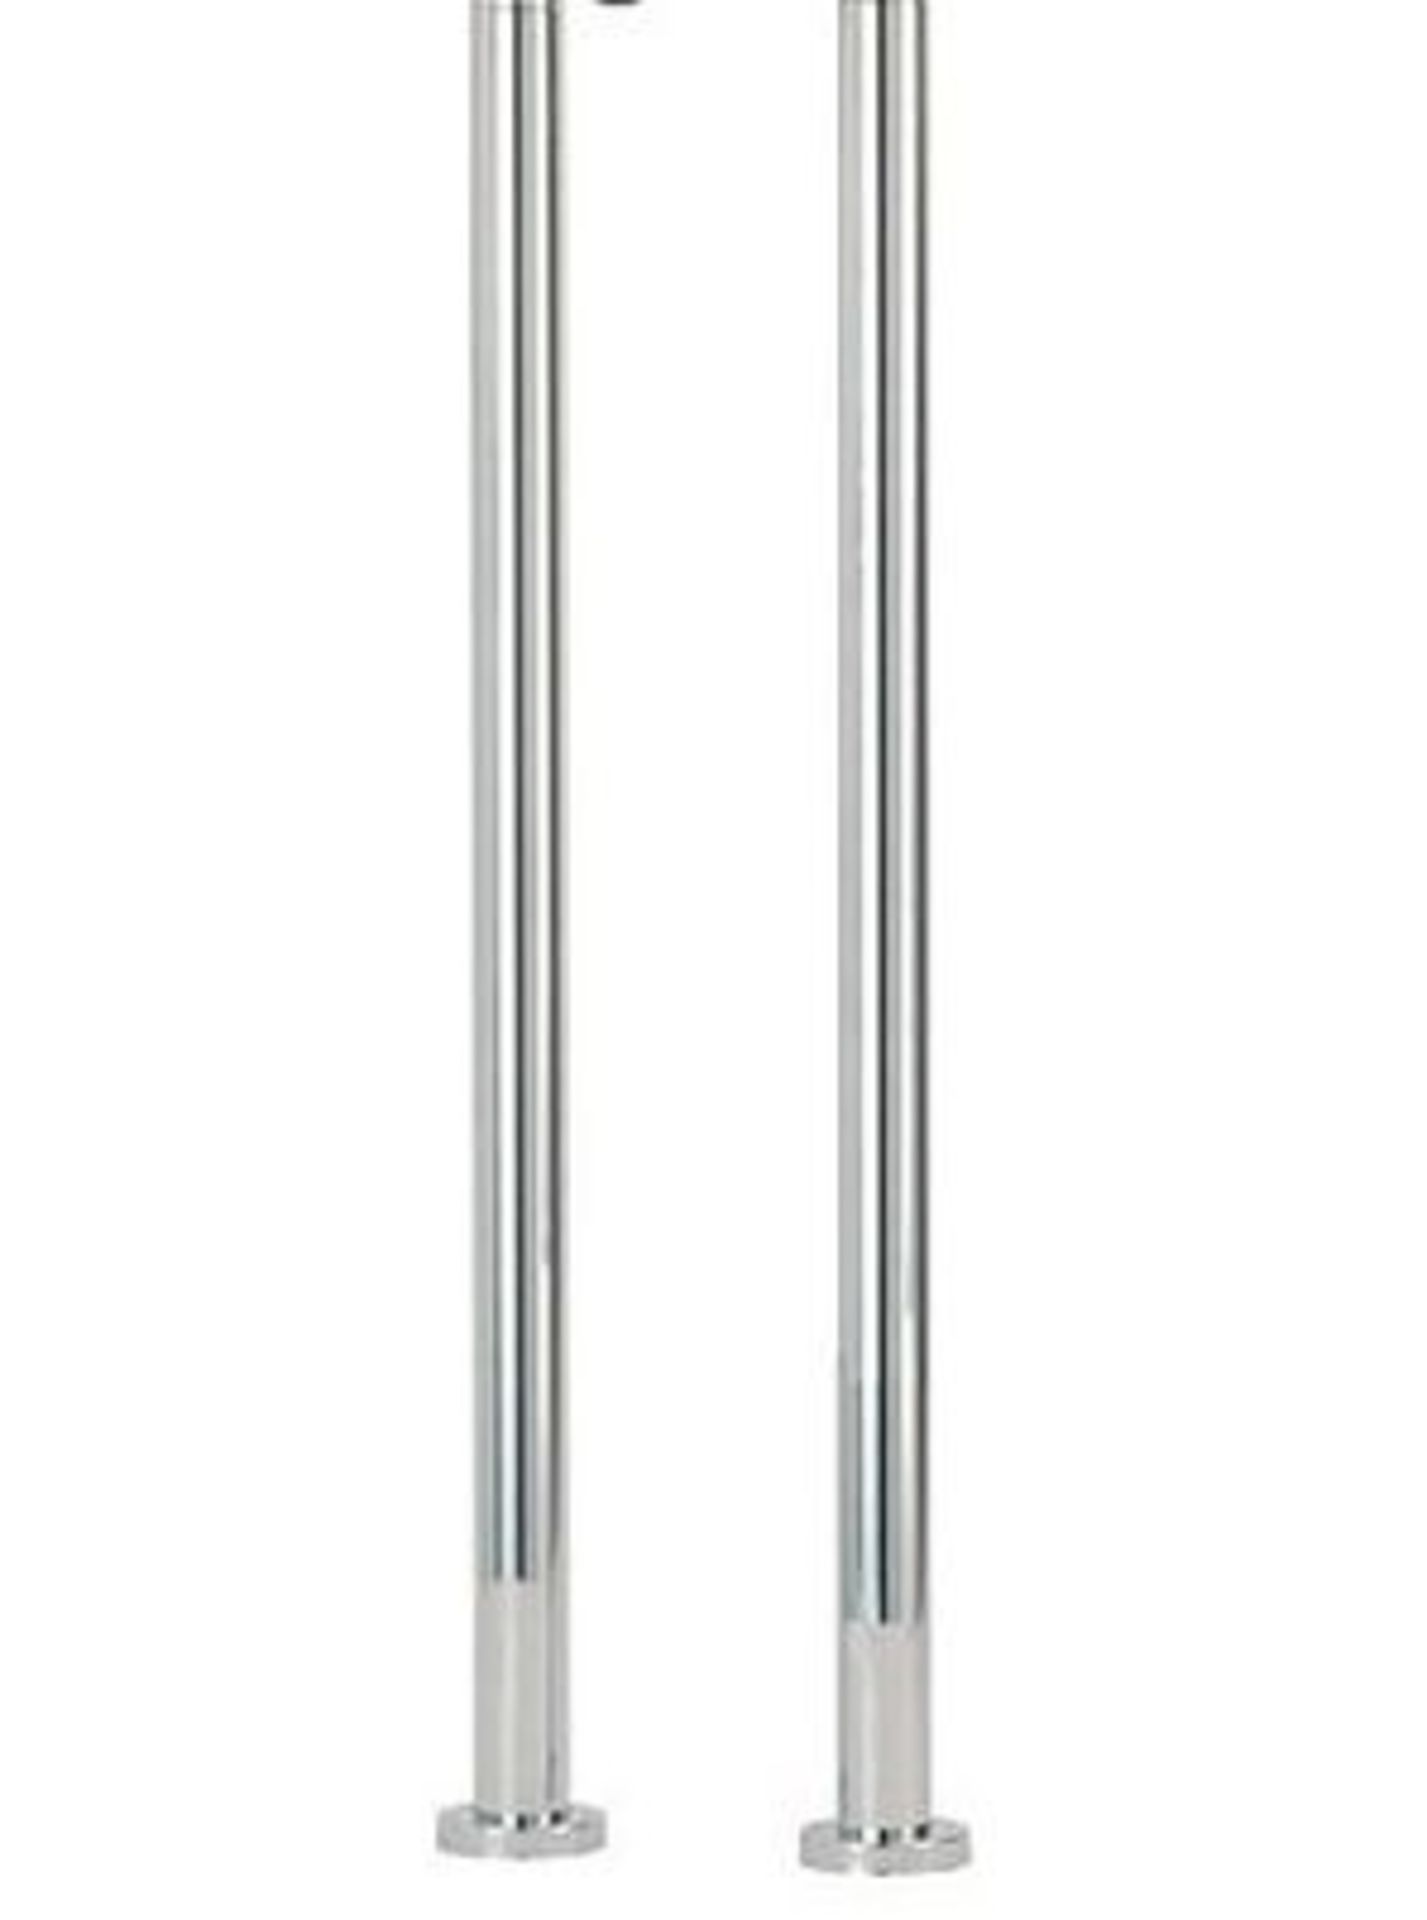 PAIR OF METRO FLOOR STANDING TAP SHROUDS. SOLID BRASS CONSTRUCTION WITH DOUBLE DIPPED POLISHED CHROM